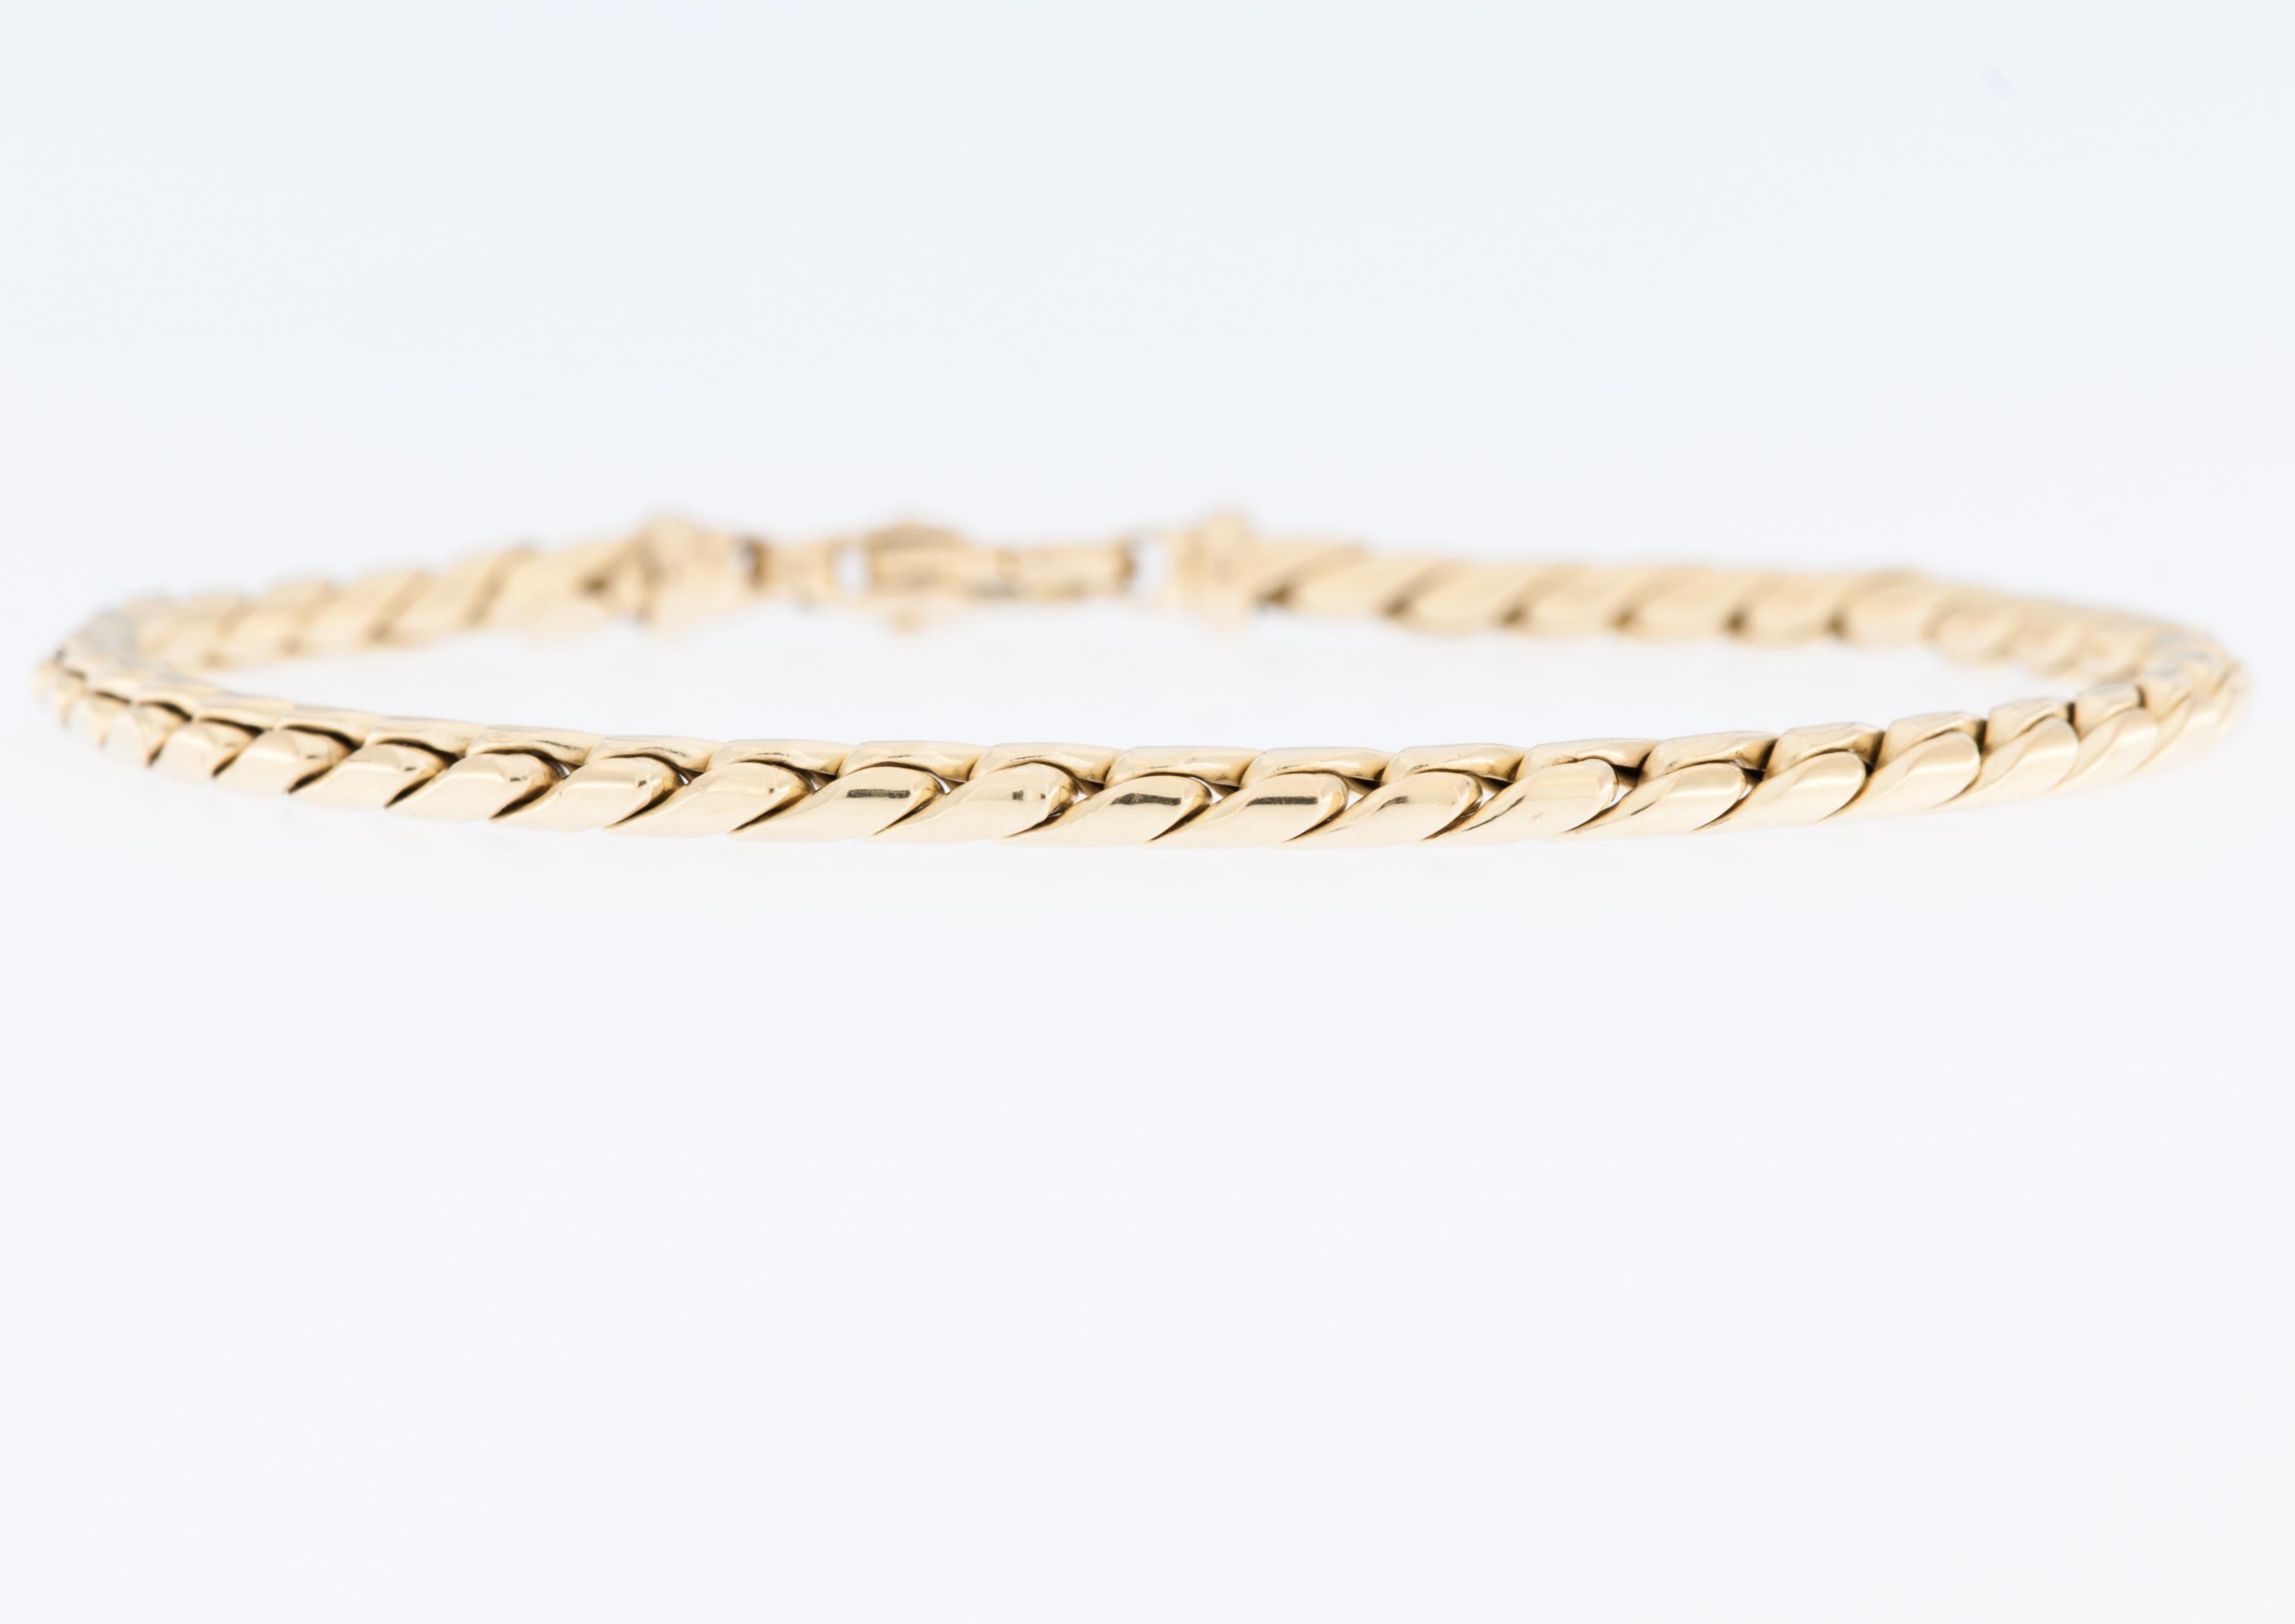 The Modern Italian 18kt Yellow Gold Bracelet exudes contemporary elegance and sophistication.

This bracelet showcases a modern and chic design that reflects the latest trends in Italian jewelry. The design features sleek lines, geometric shapes